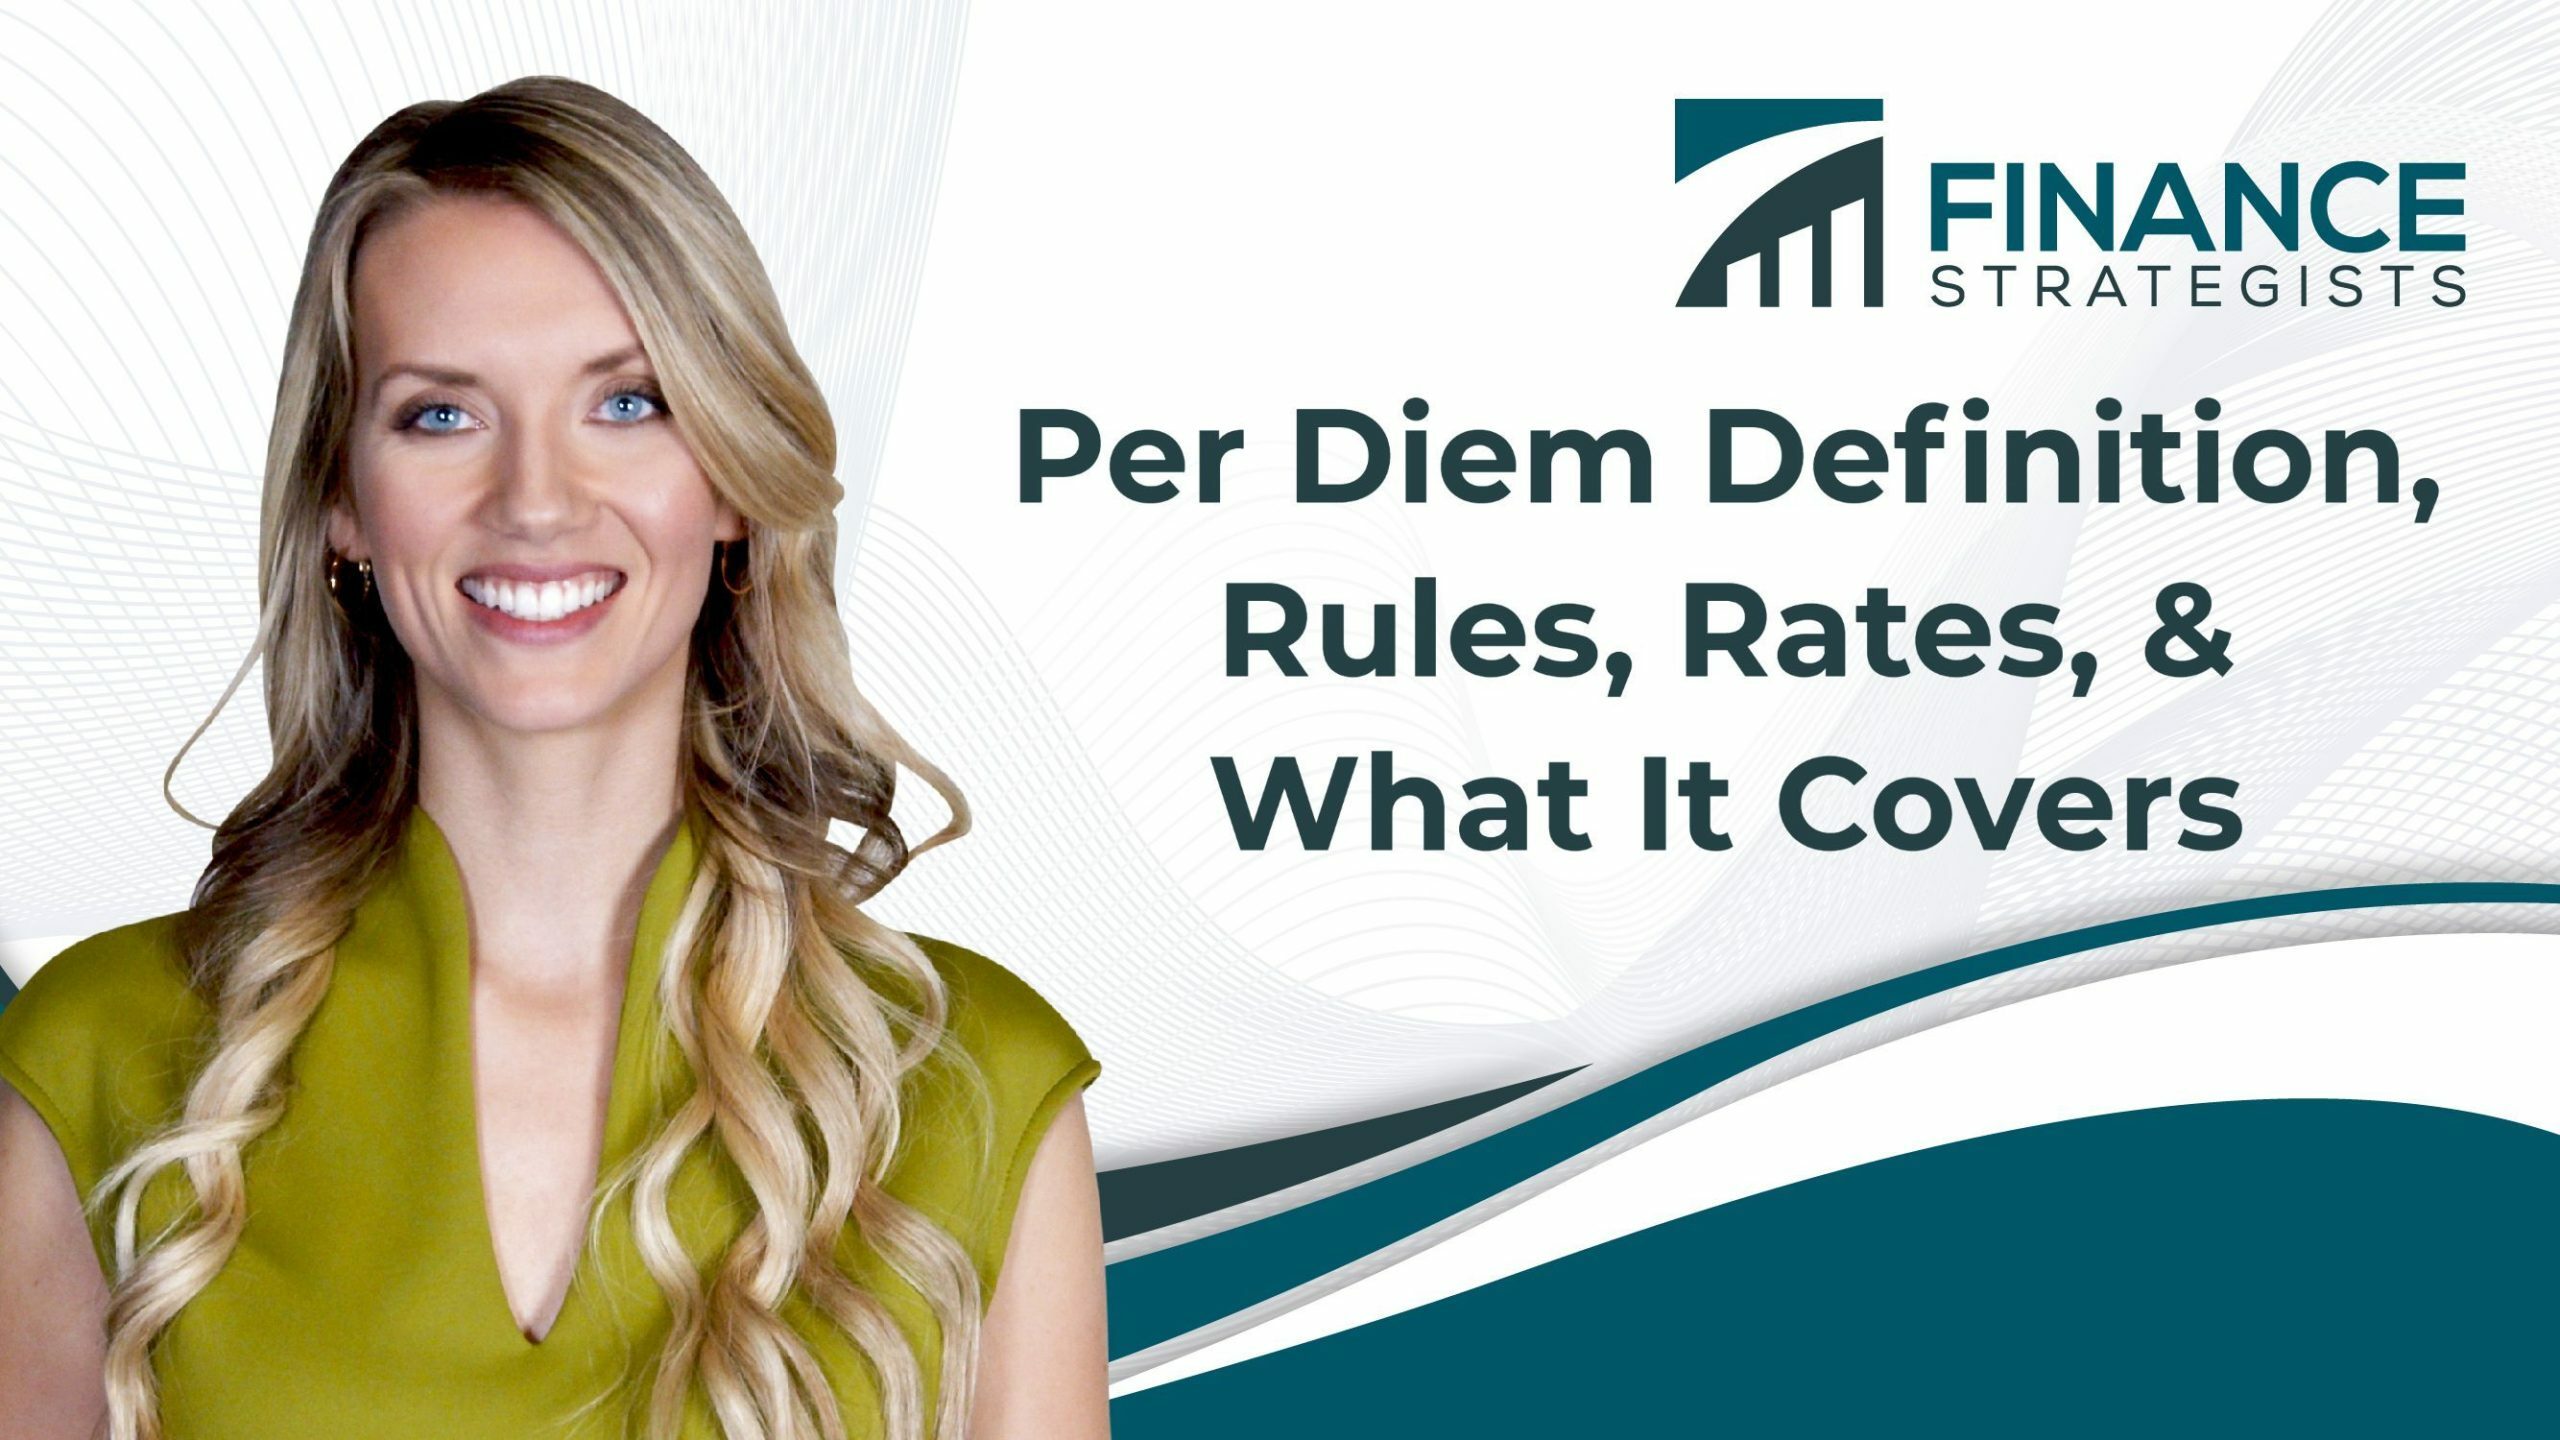 Per Diem Definition, What It Covers, Rules, Benefits, and Rates